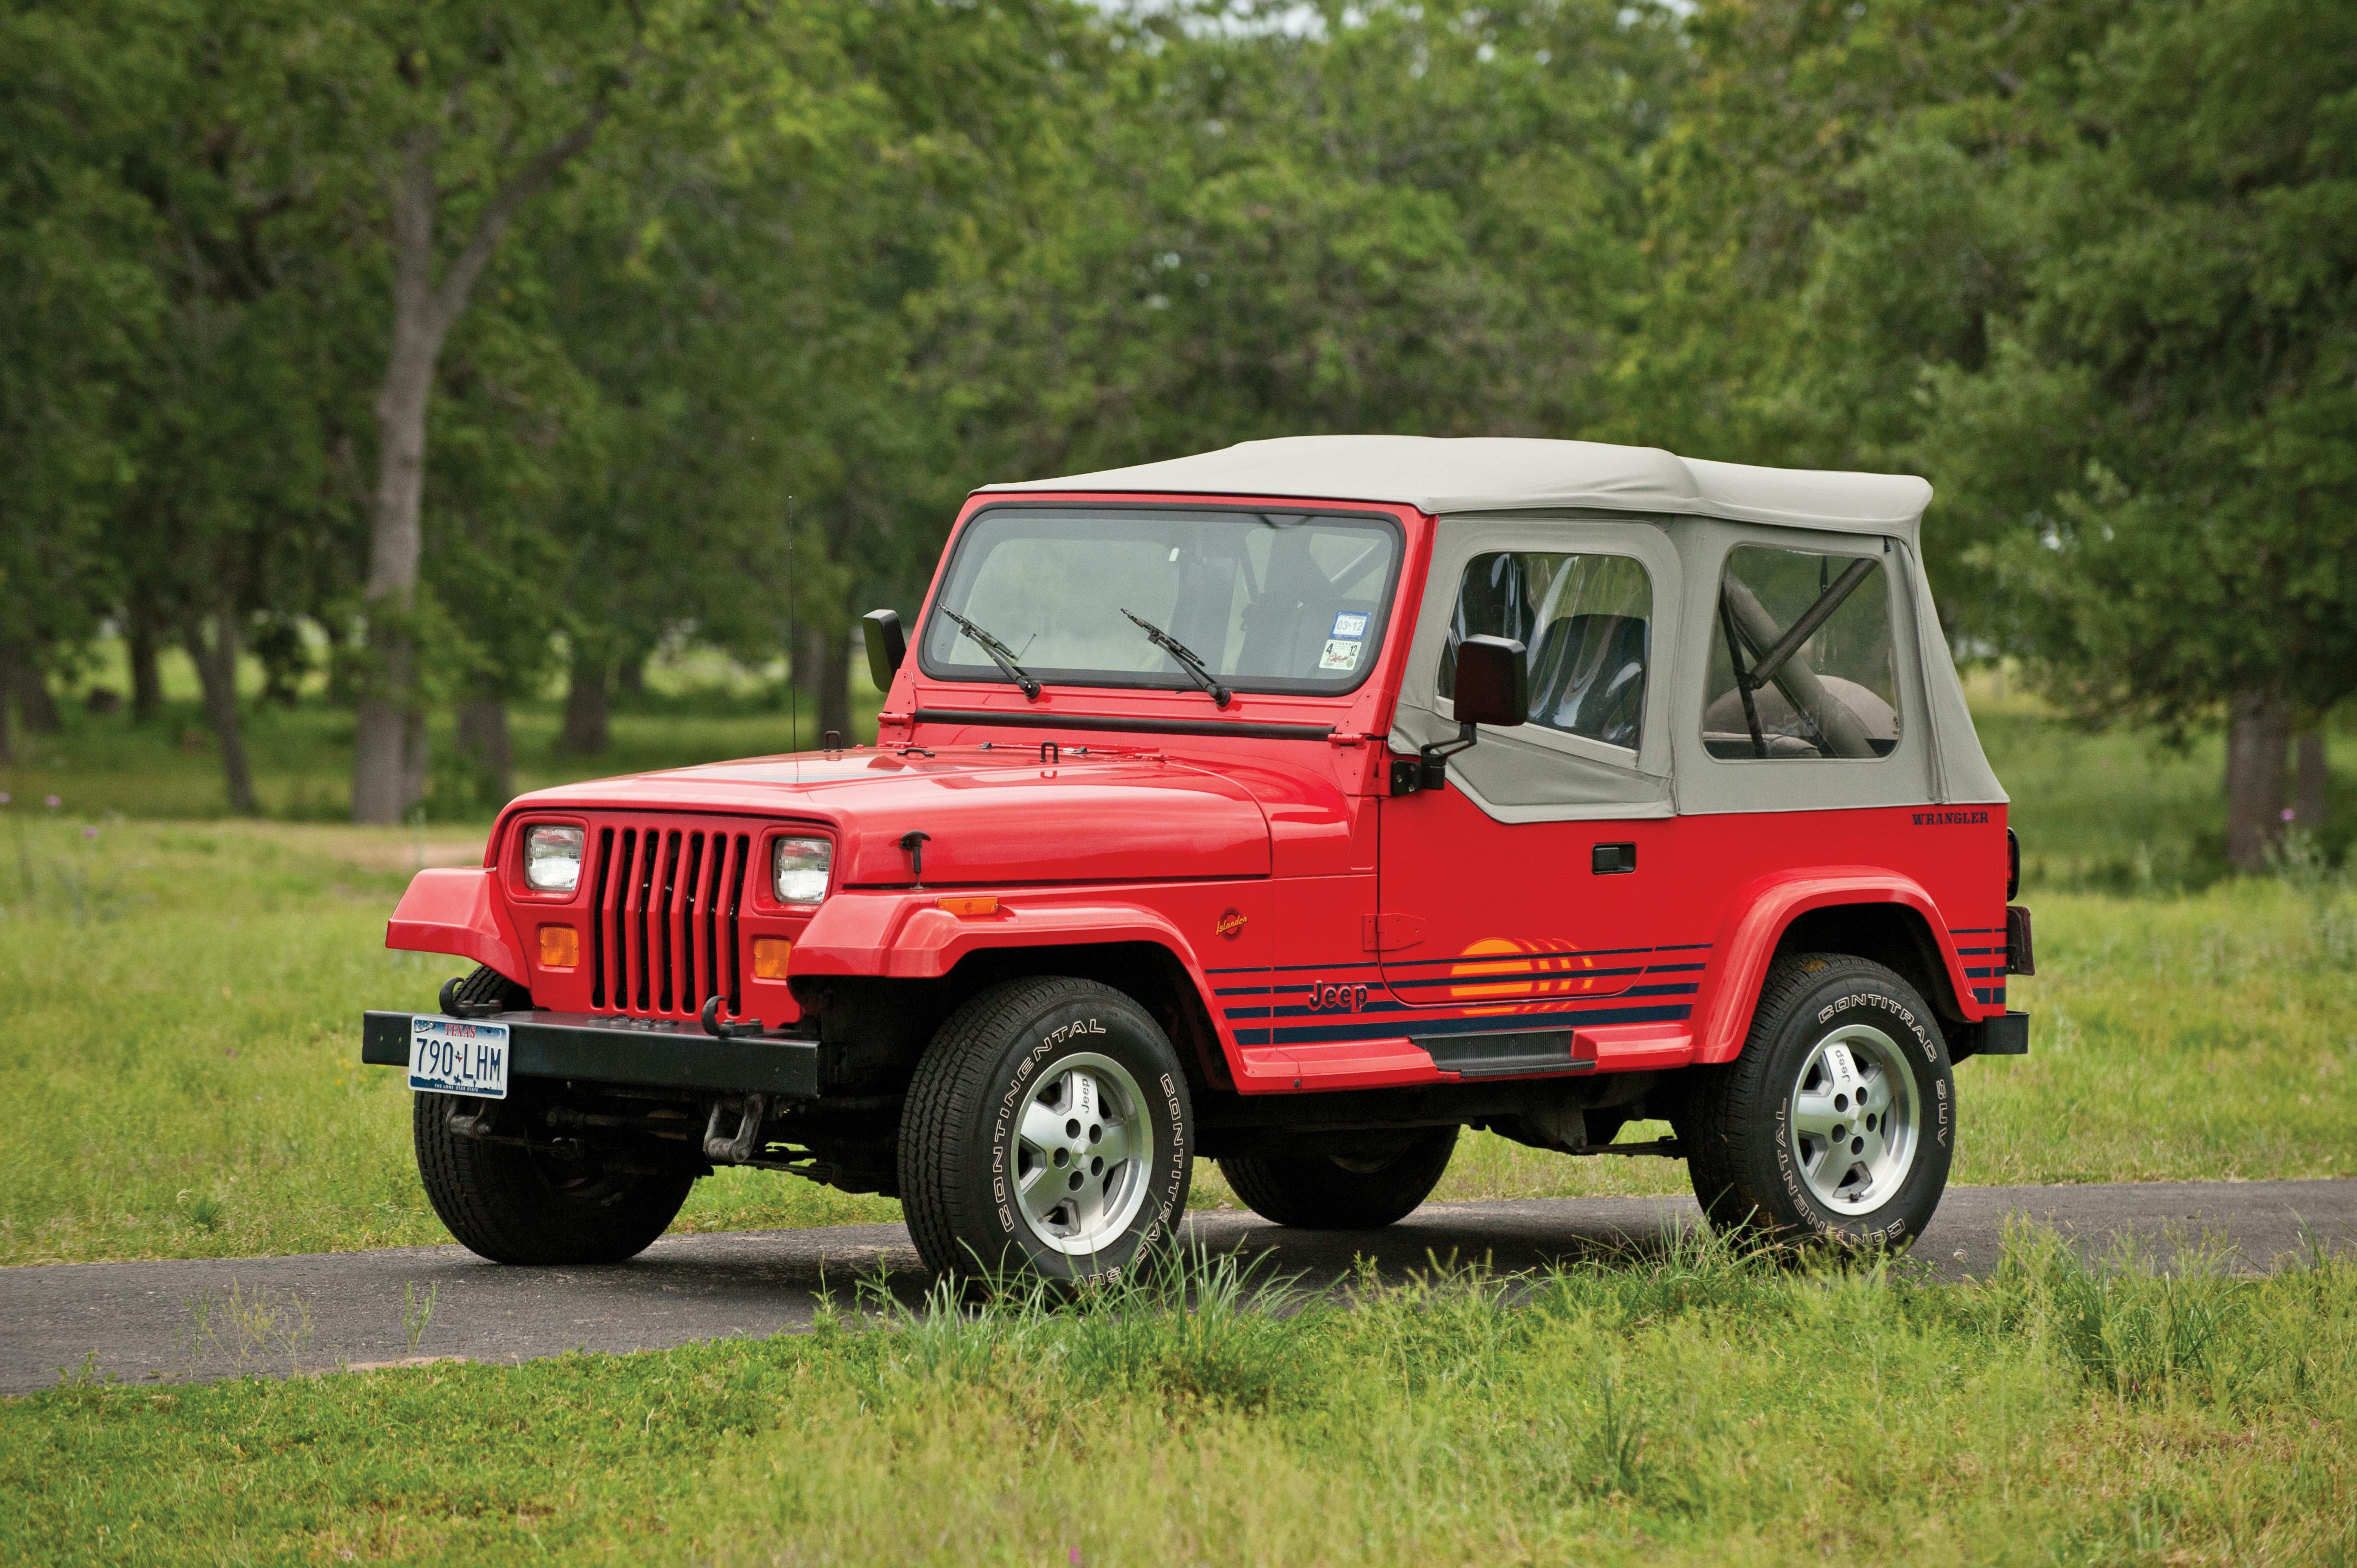 1995 Jeep Wrangler SE | Hagerty Valuation Tools